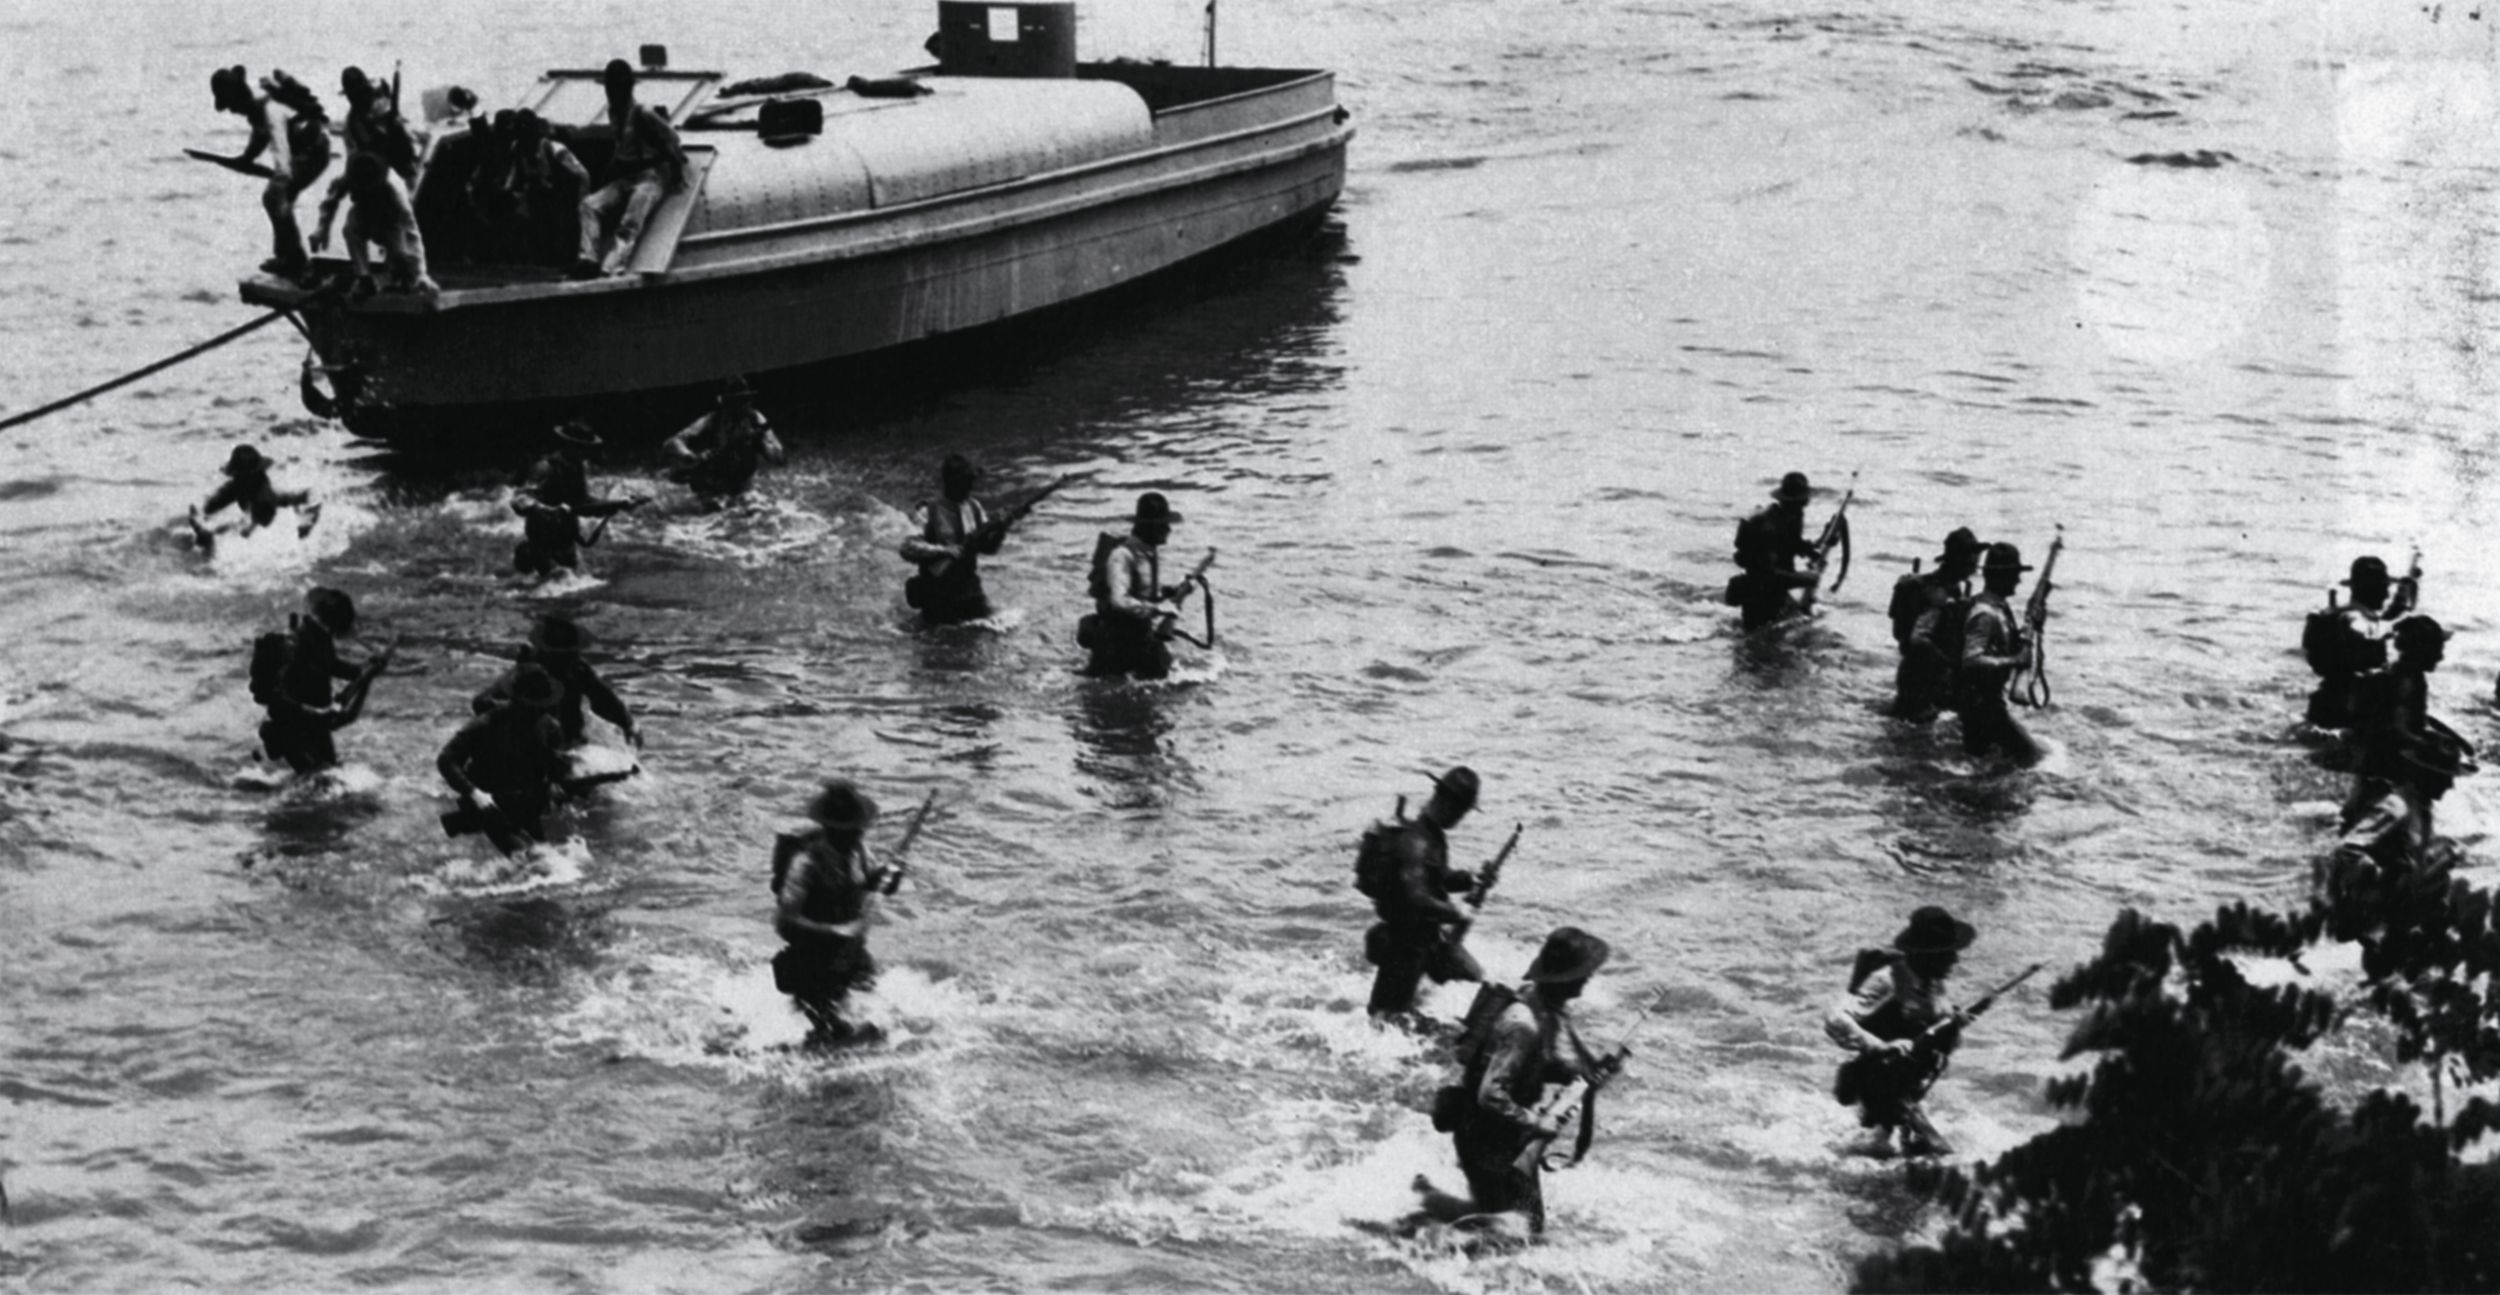 U.S. Marines train for an amphibious landing at Culebra, Puerto Rico, in 1924. The experimental landing barge shown in the photo proved to be unseaworthy and impractical.